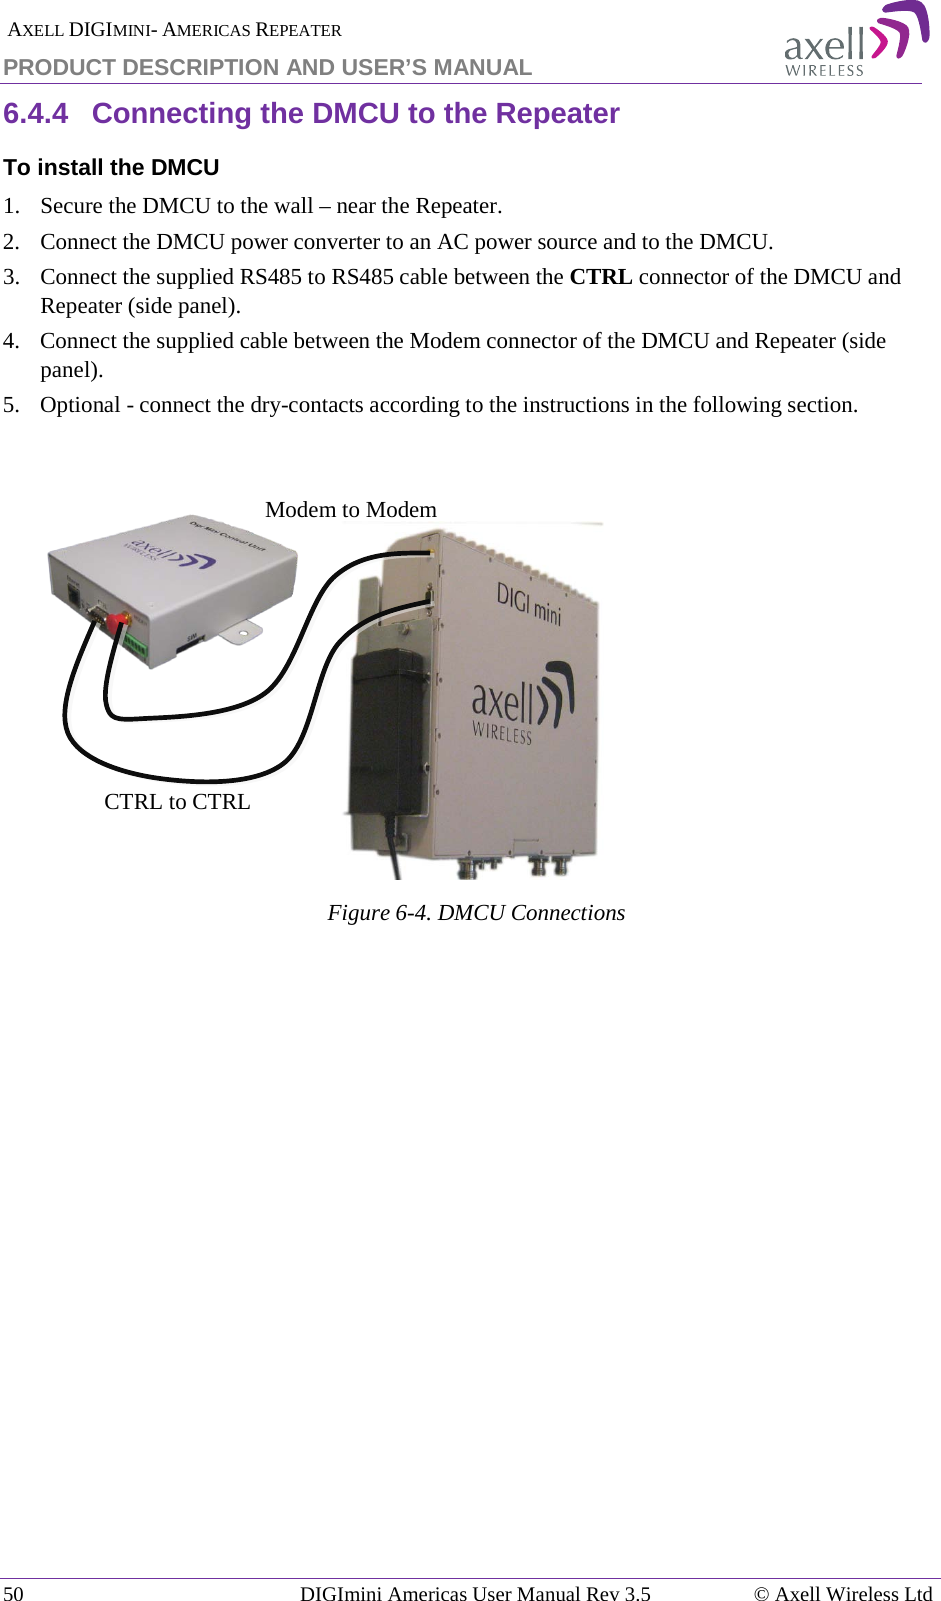  AXELL DIGIMINI- AMERICAS REPEATER PRODUCT DESCRIPTION AND USER’S MANUAL 50   DIGImini Americas User Manual Rev 3.5  © Axell Wireless Ltd 6.4.4  Connecting the DMCU to the Repeater To install the DMCU 1.  Secure the DMCU to the wall – near the Repeater. 2.  Connect the DMCU power converter to an AC power source and to the DMCU.  3.  Connect the supplied RS485 to RS485 cable between the CTRL connector of the DMCU and Repeater (side panel). 4.  Connect the supplied cable between the Modem connector of the DMCU and Repeater (side panel). 5.  Optional - connect the dry-contacts according to the instructions in the following section.     Figure  6-4. DMCU Connections   Modem to Modem CTRL to CTRL 